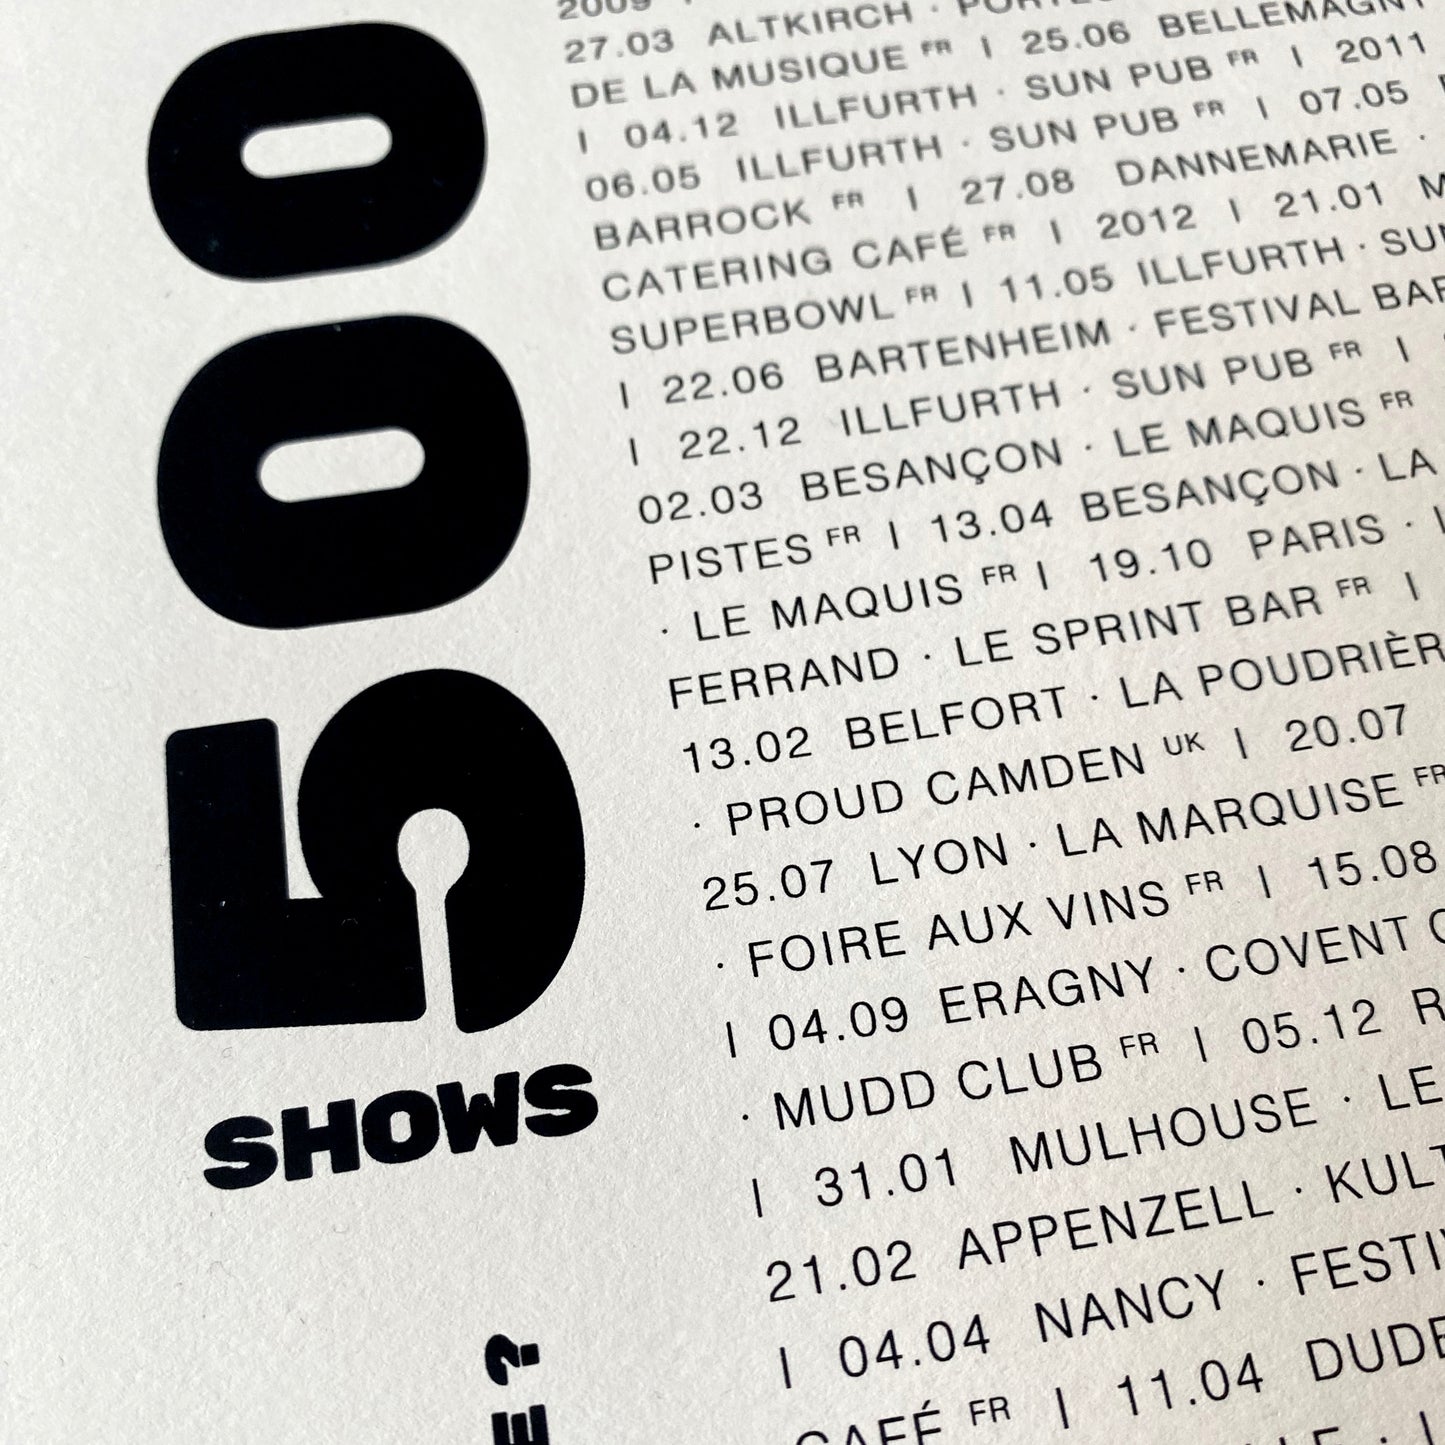 Poster "500 shows"